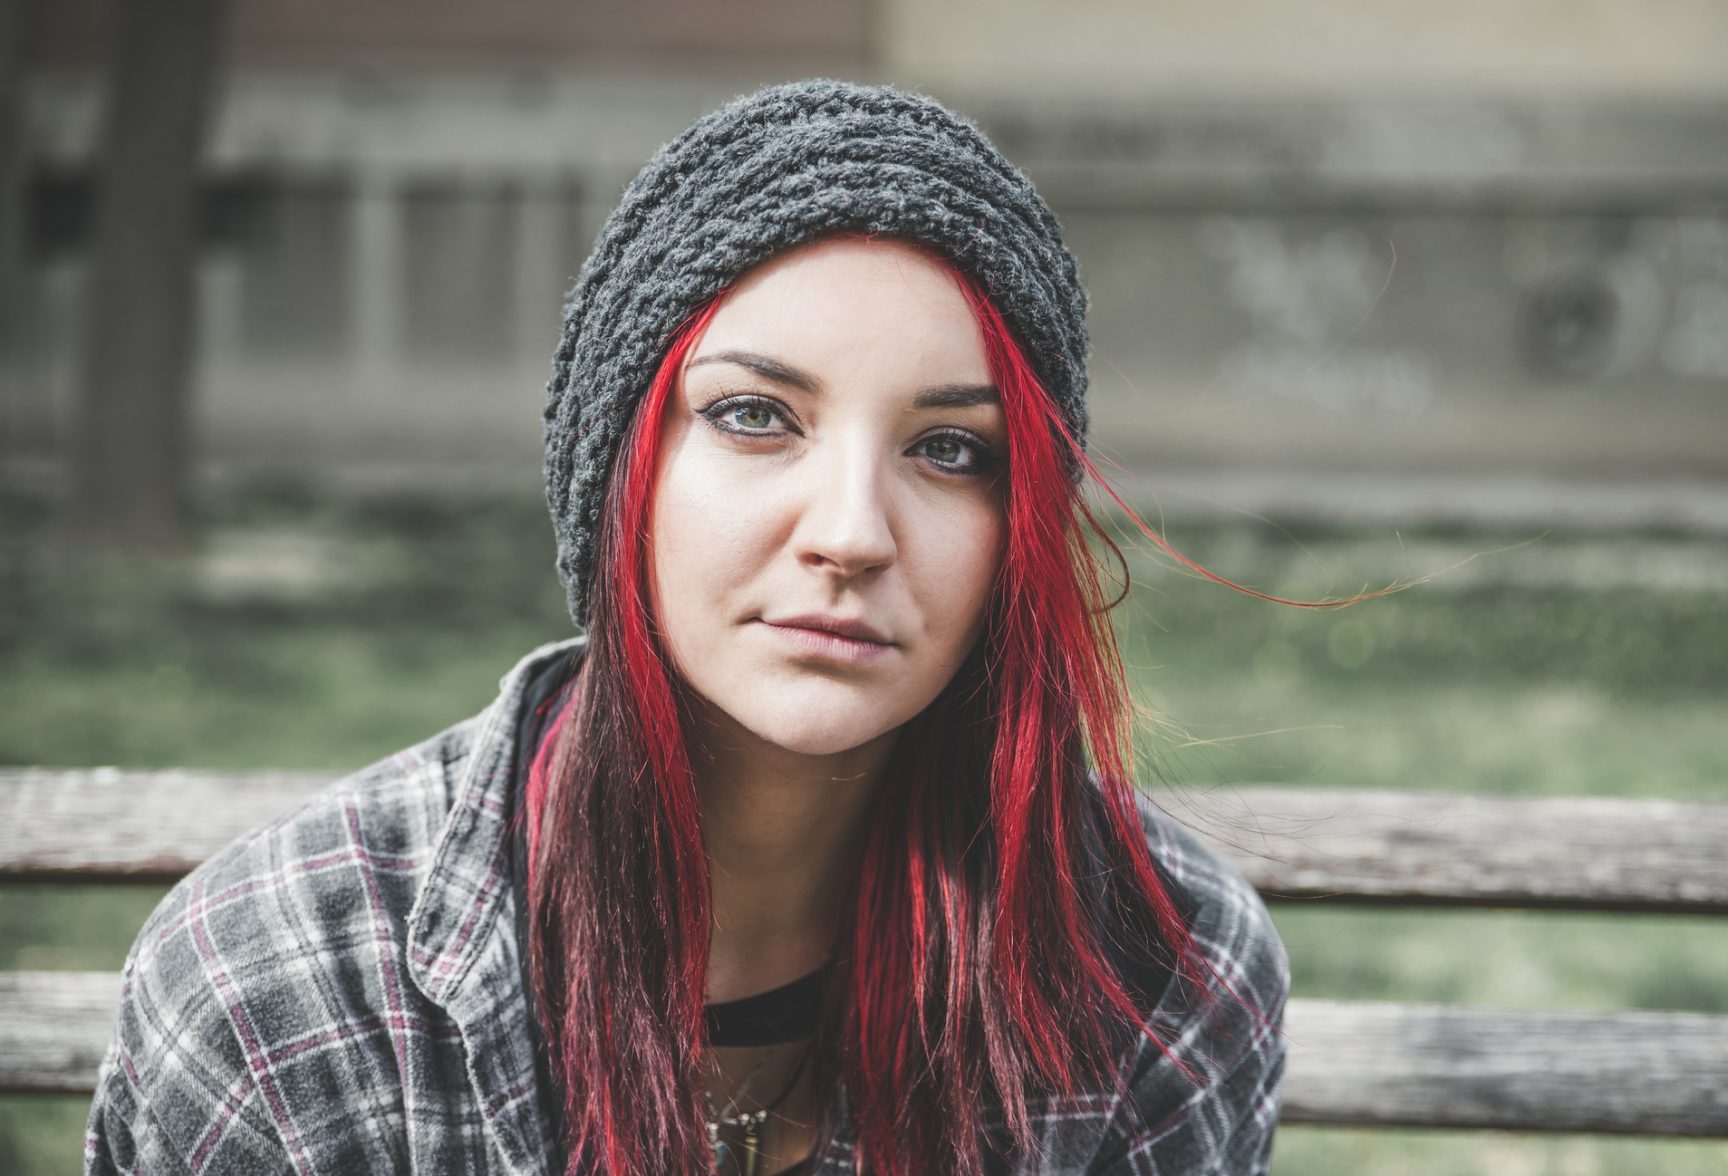 the photo shows a young girl sitting outside on a park bench, she has green eyes and long straight red hair, she is looking at the camera with a neutral expression